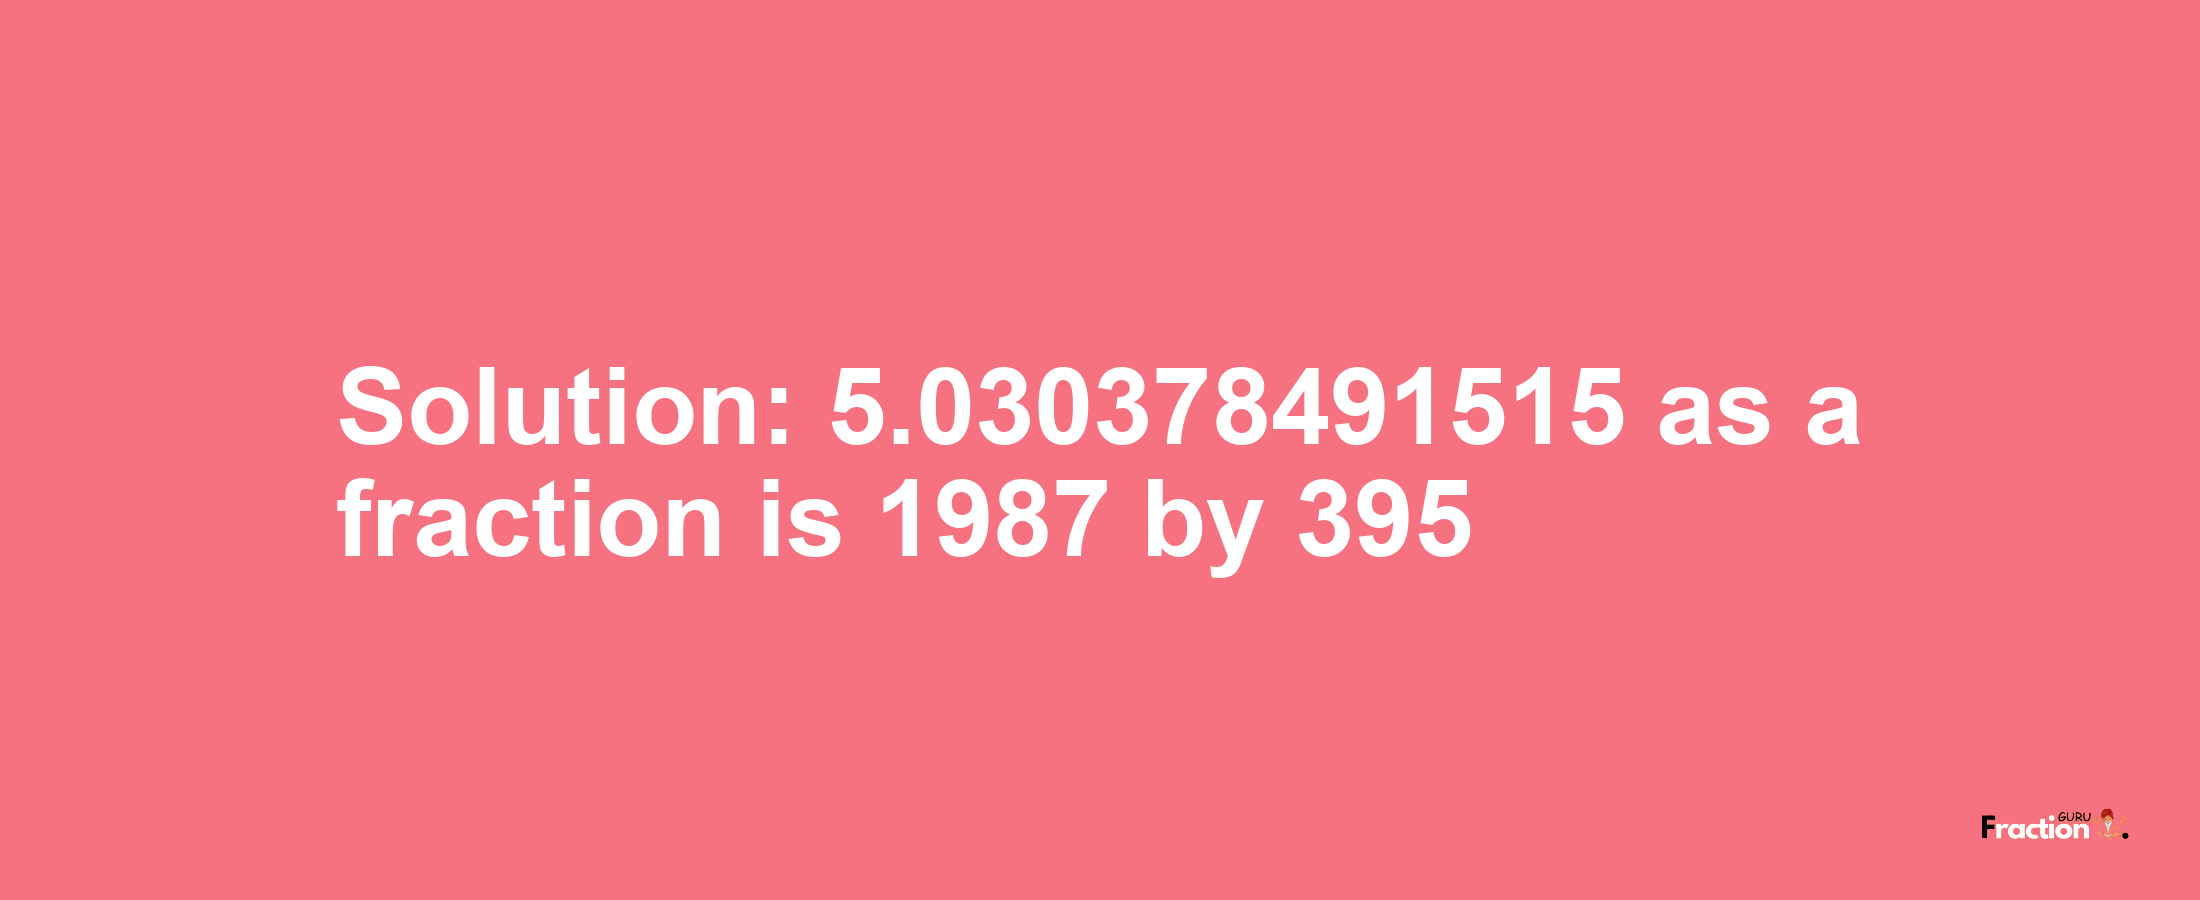 Solution:5.030378491515 as a fraction is 1987/395